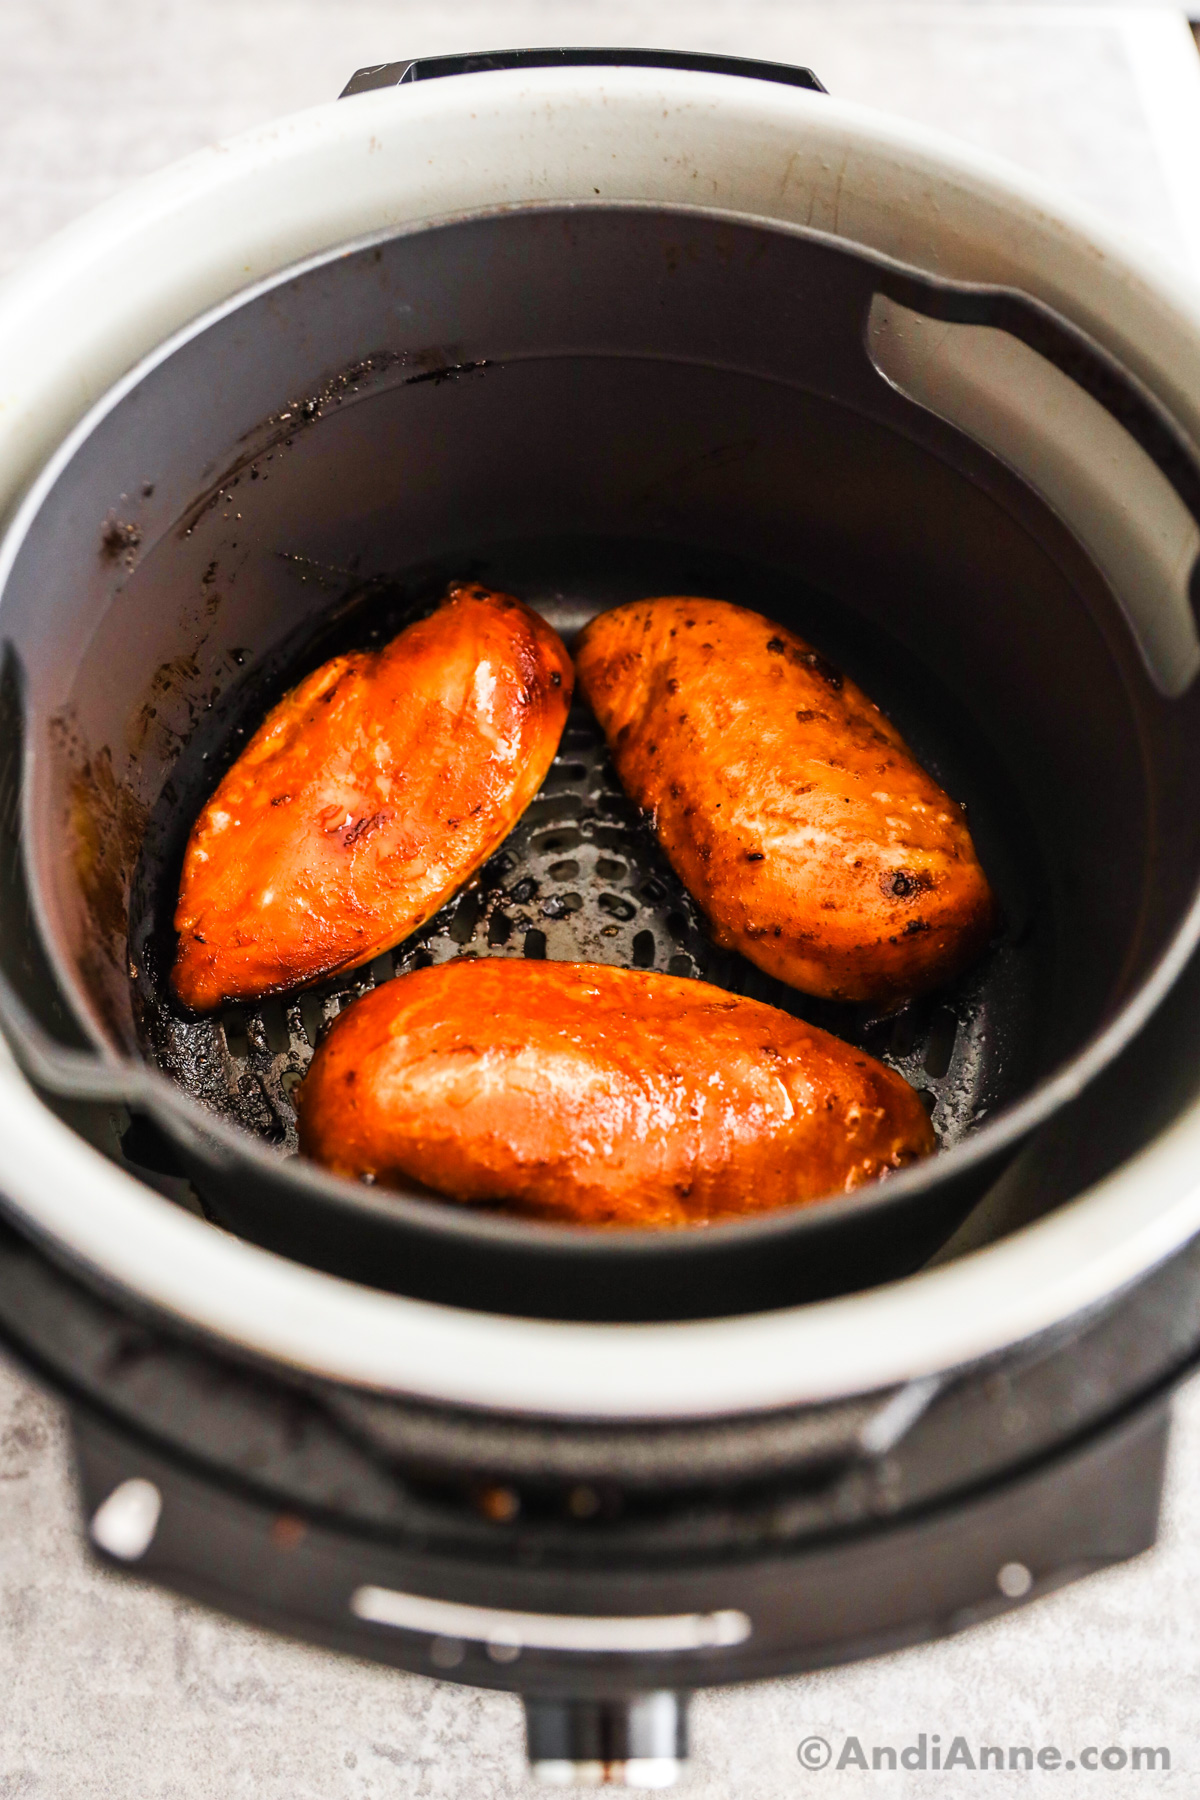 Looking into an air fryer with three cooked chicken breasts.